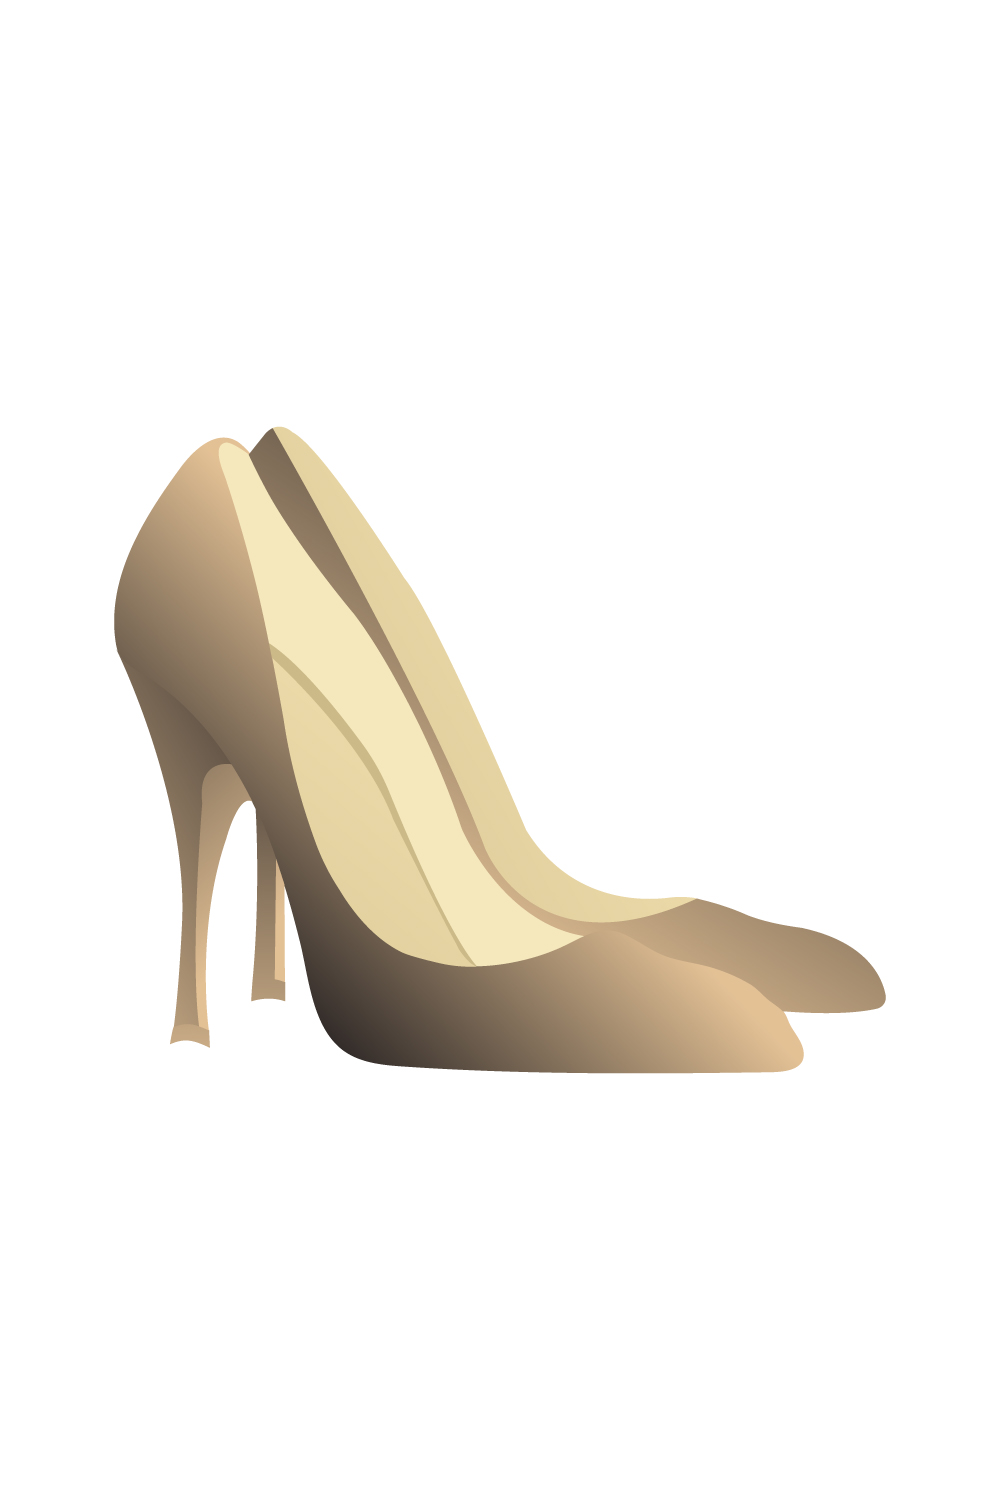 High heel shoe logo design vector images Women High Heel shoes template company identity pinterest preview image.